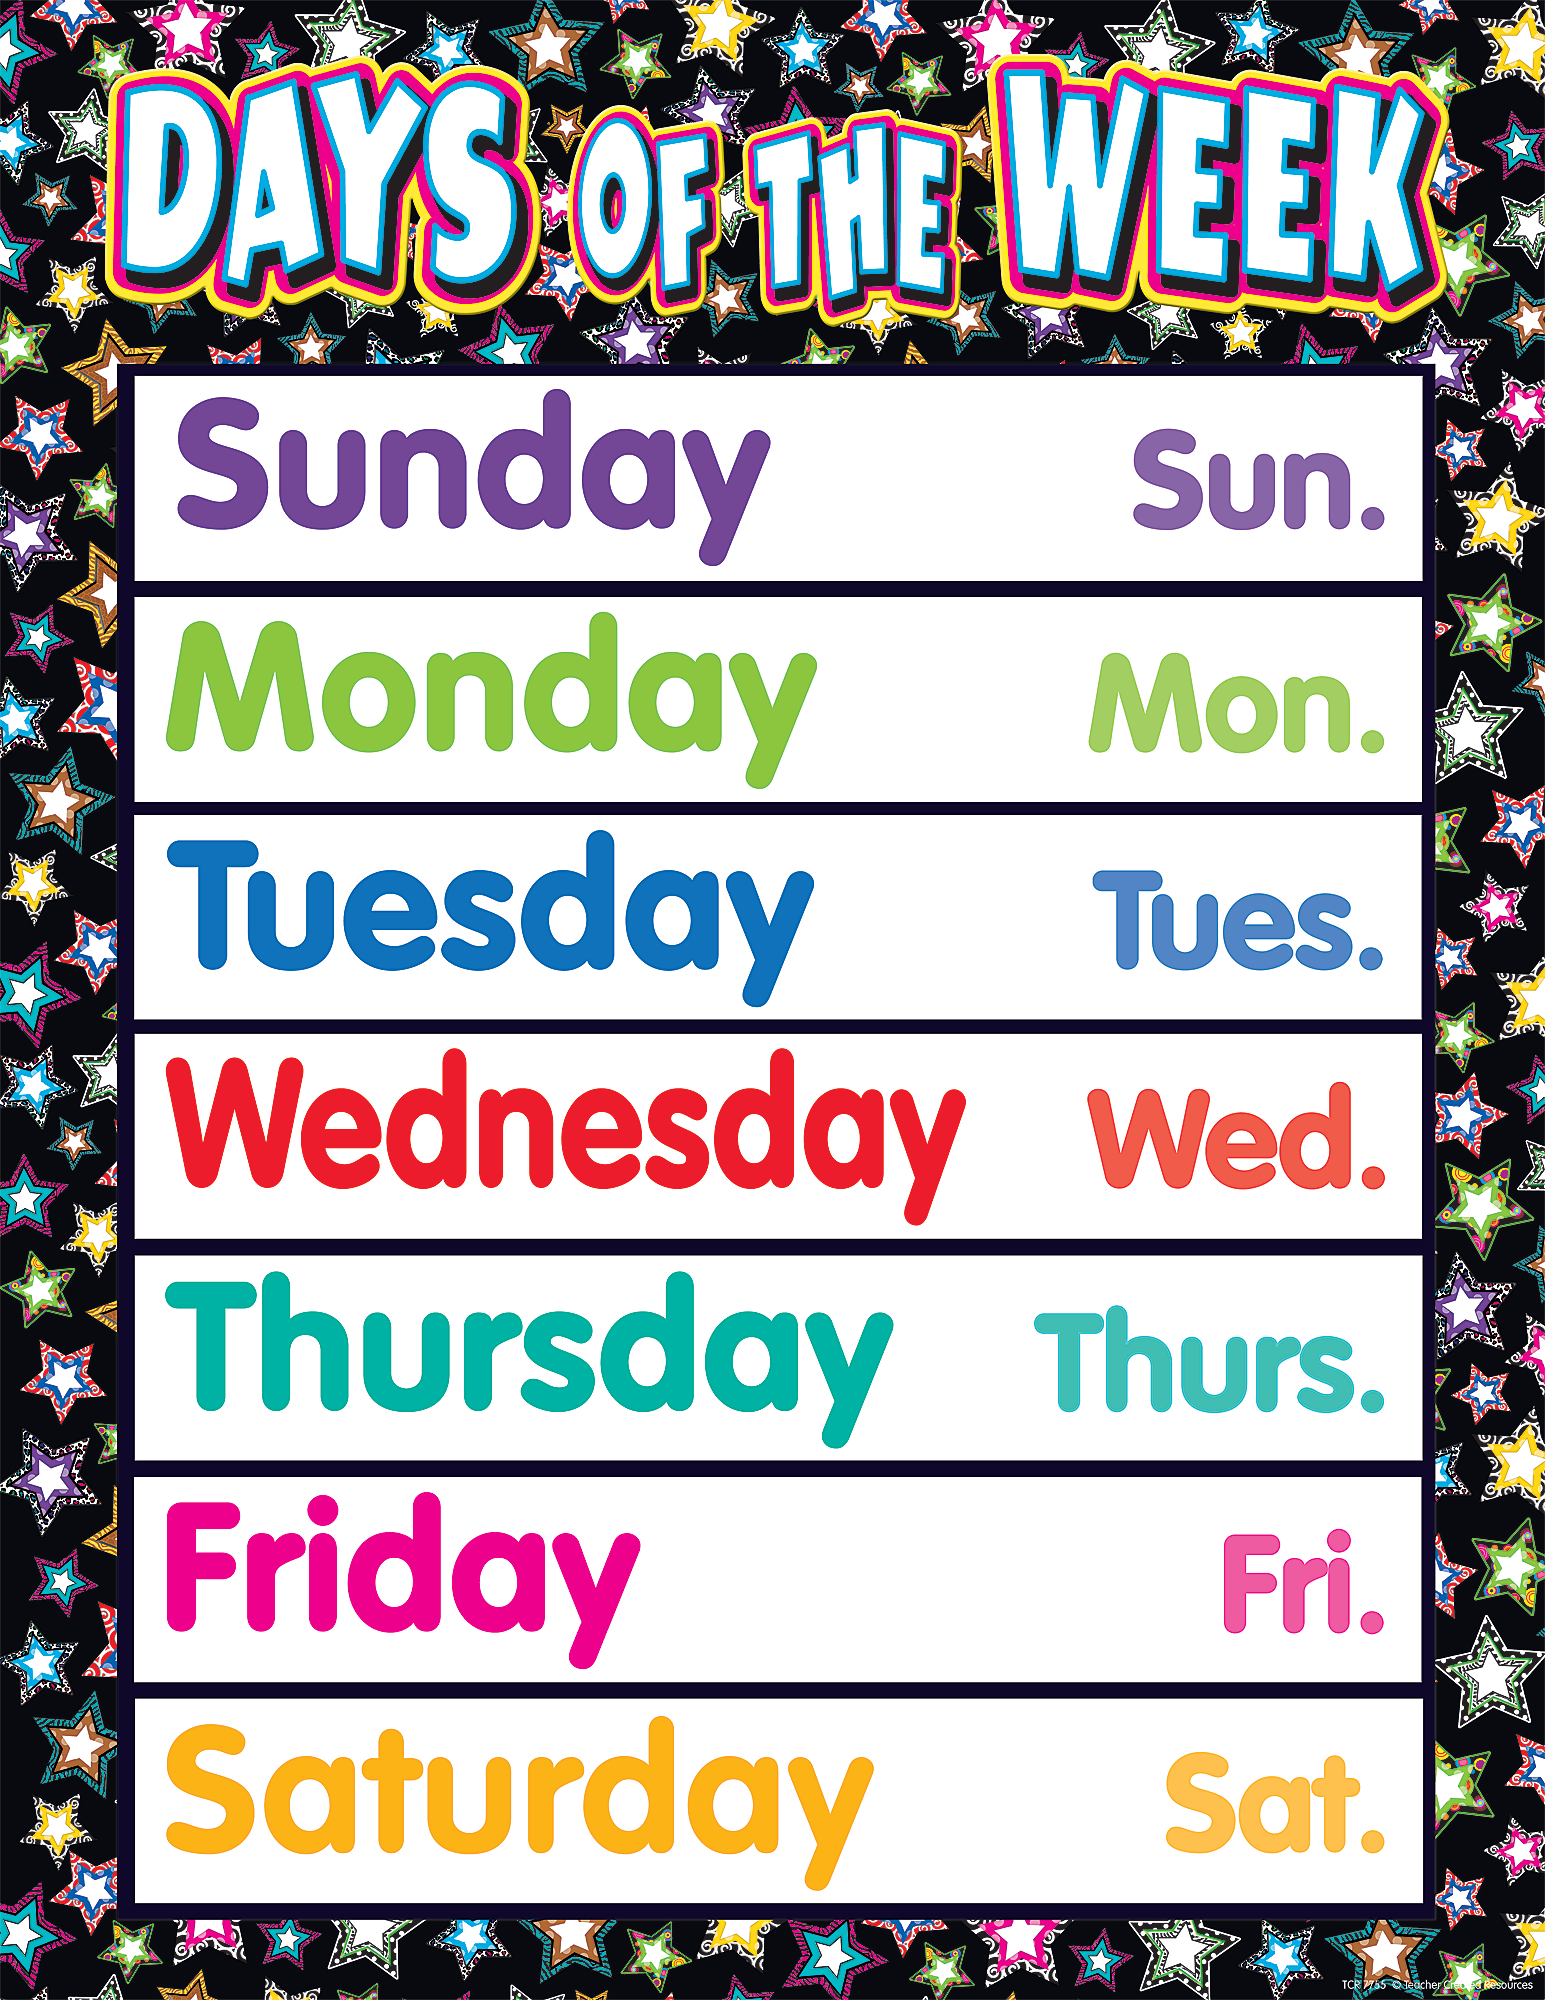 Favourite day of the week. Days of the week. Days of the week картинки. Week Days name. Days of the week Chart.